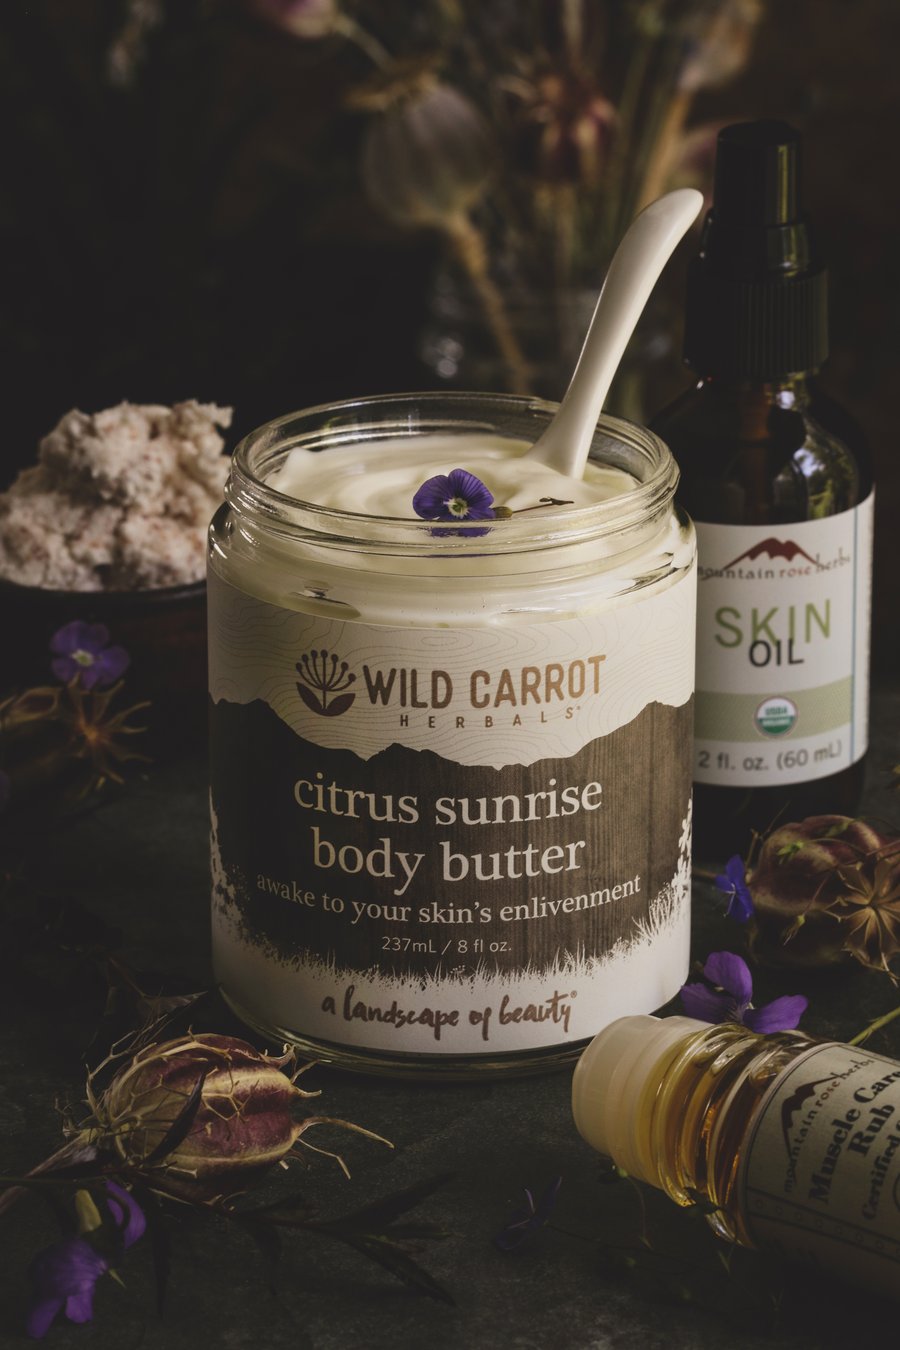 Wild Carrot Citrus Sunrise body butter surrounded with other body care products.